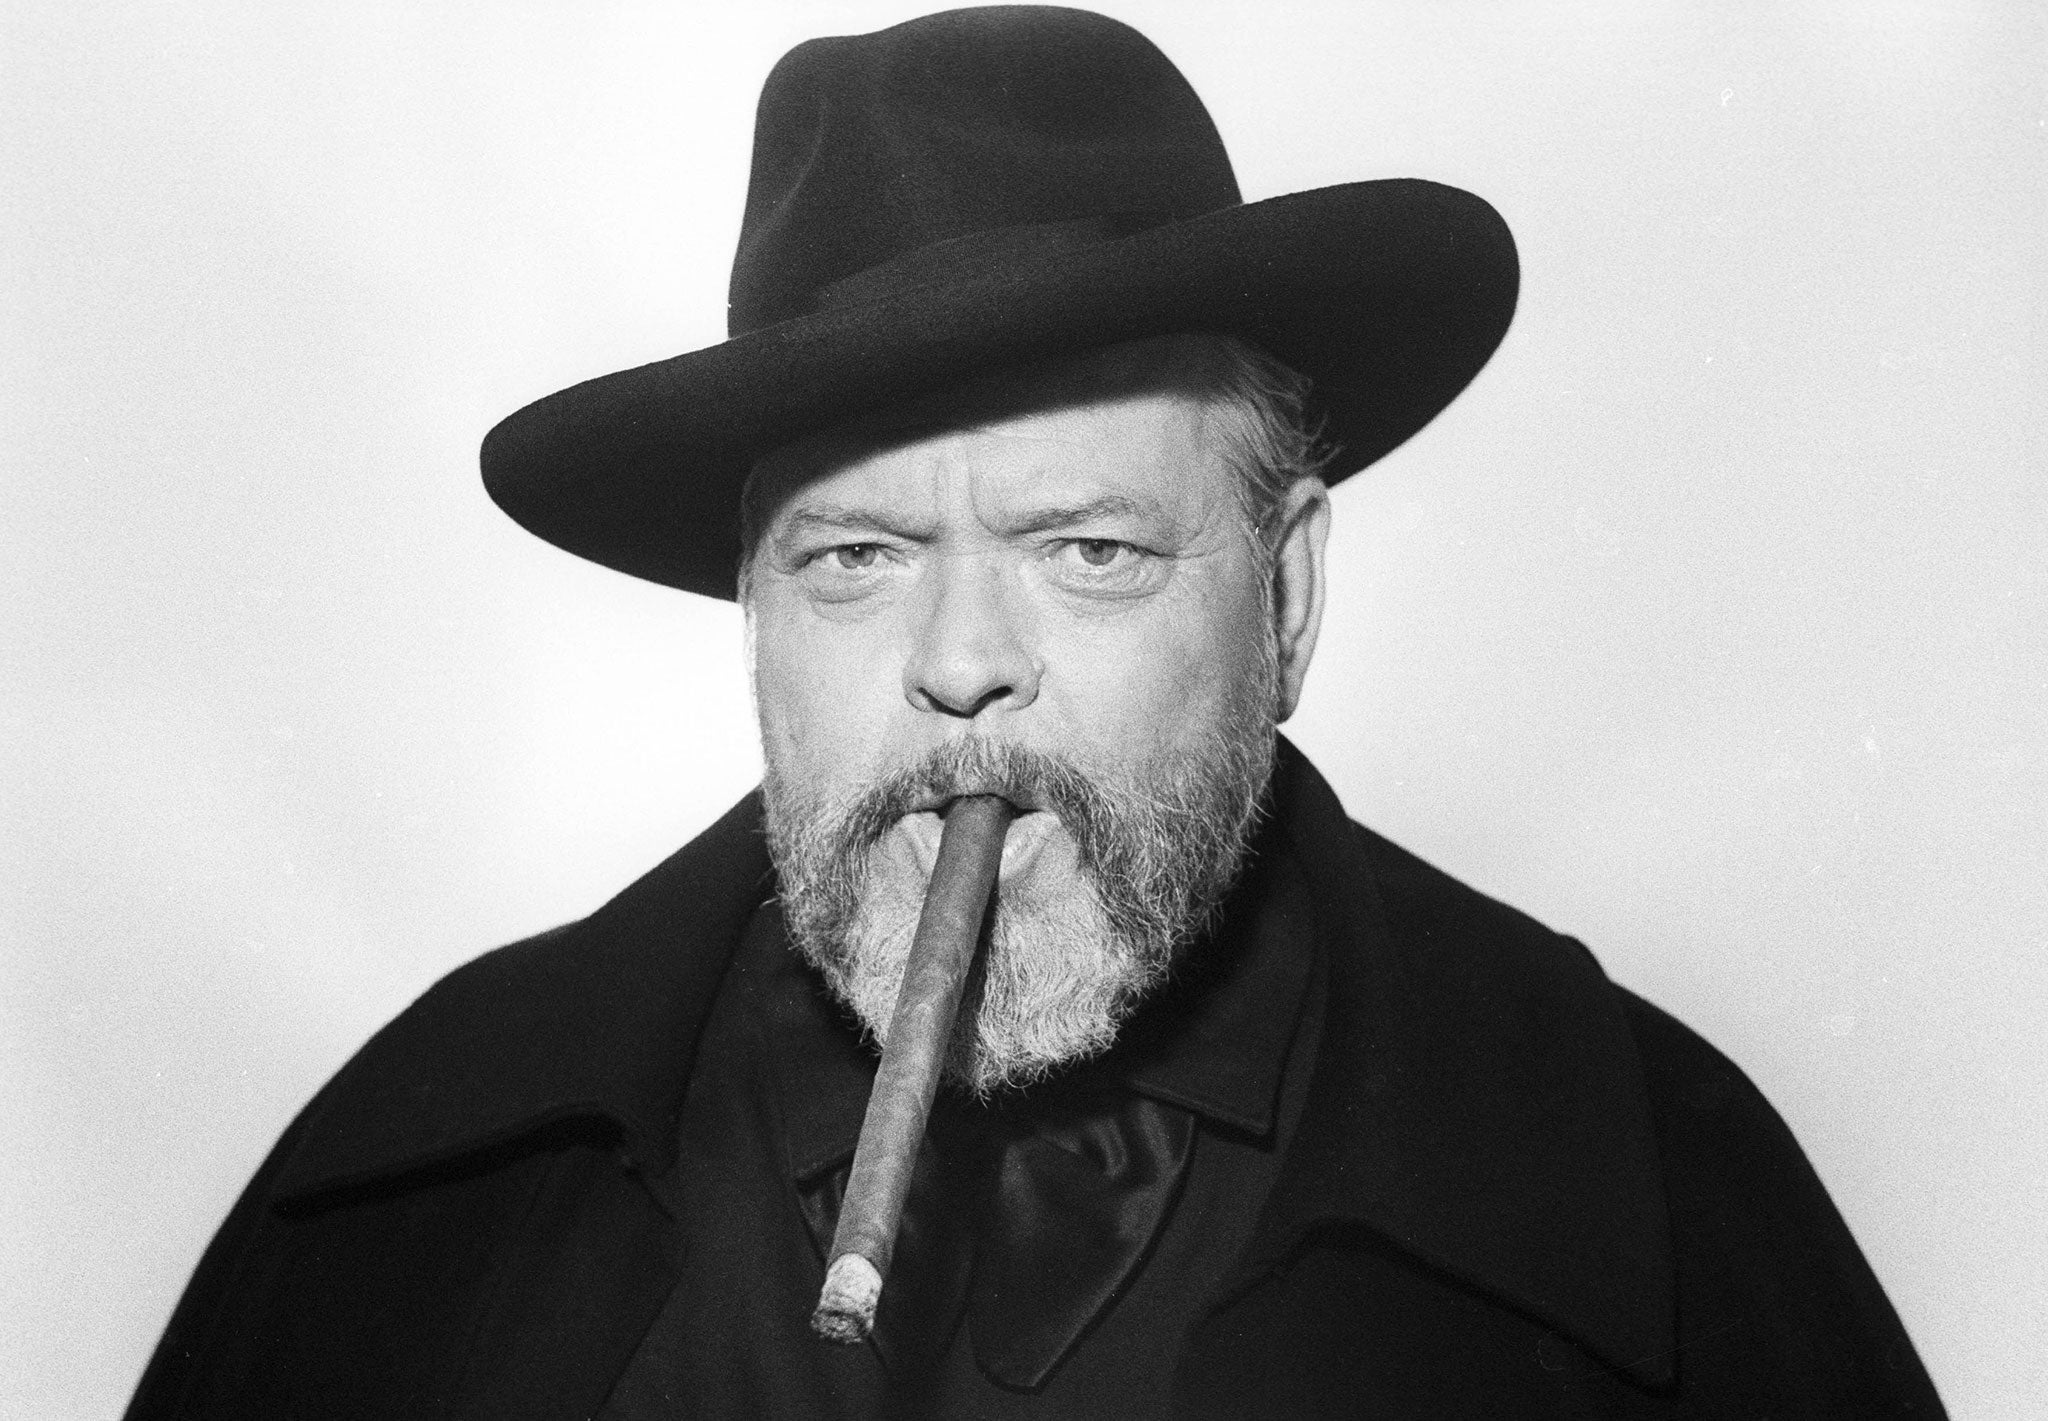 Orson Welles made Citizen Kane at 25, and battled with Hollywood film studios thereafter